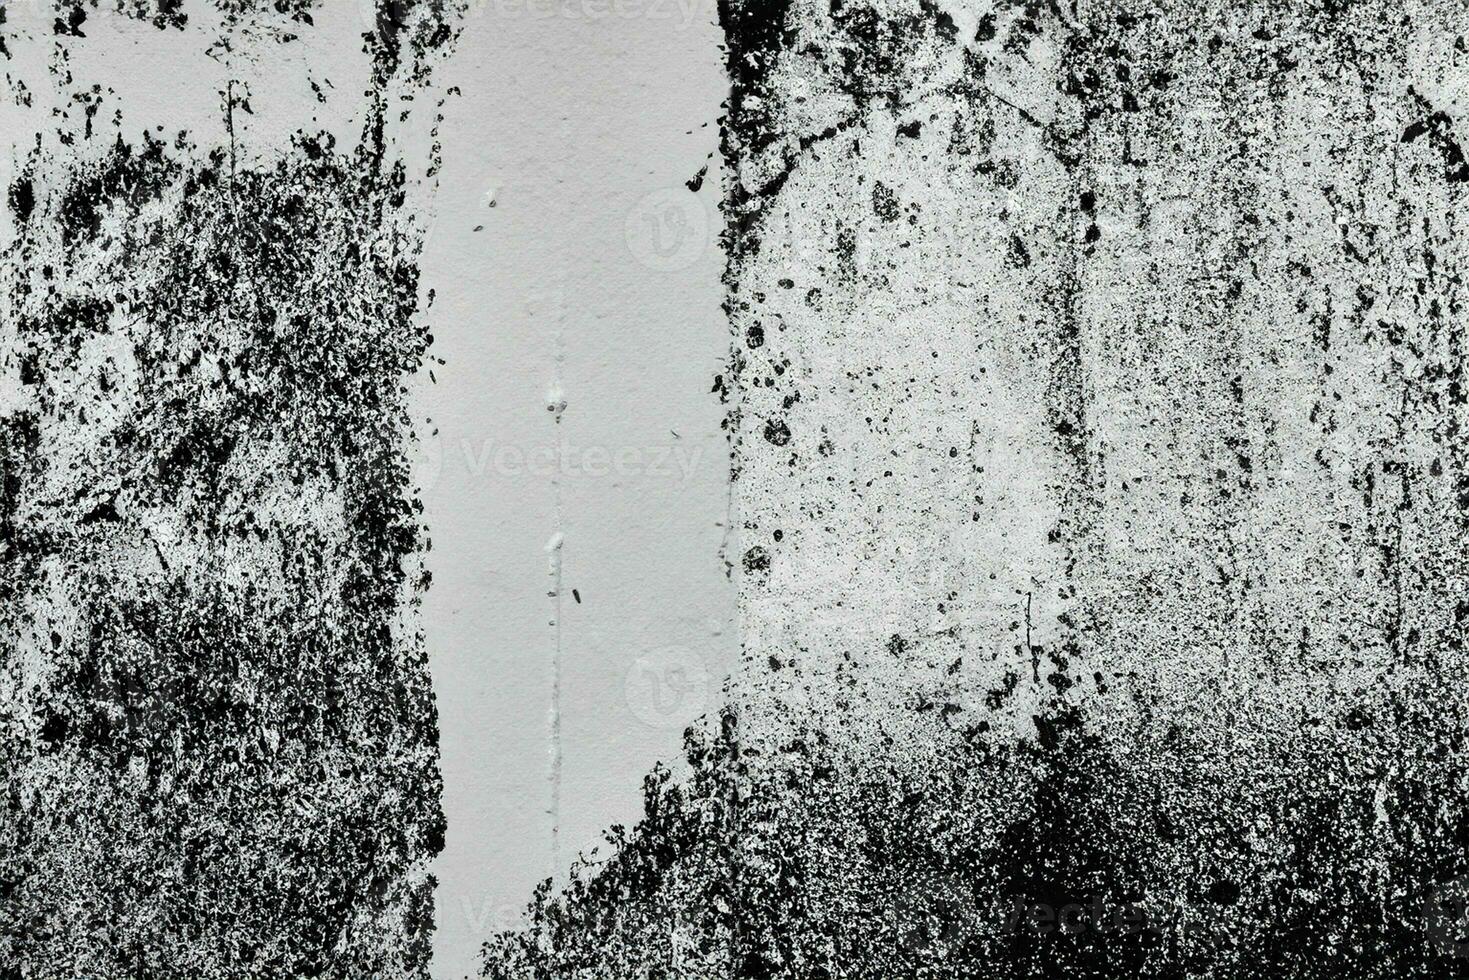 Abstract grunge texture pattern of black paint on white wall photo